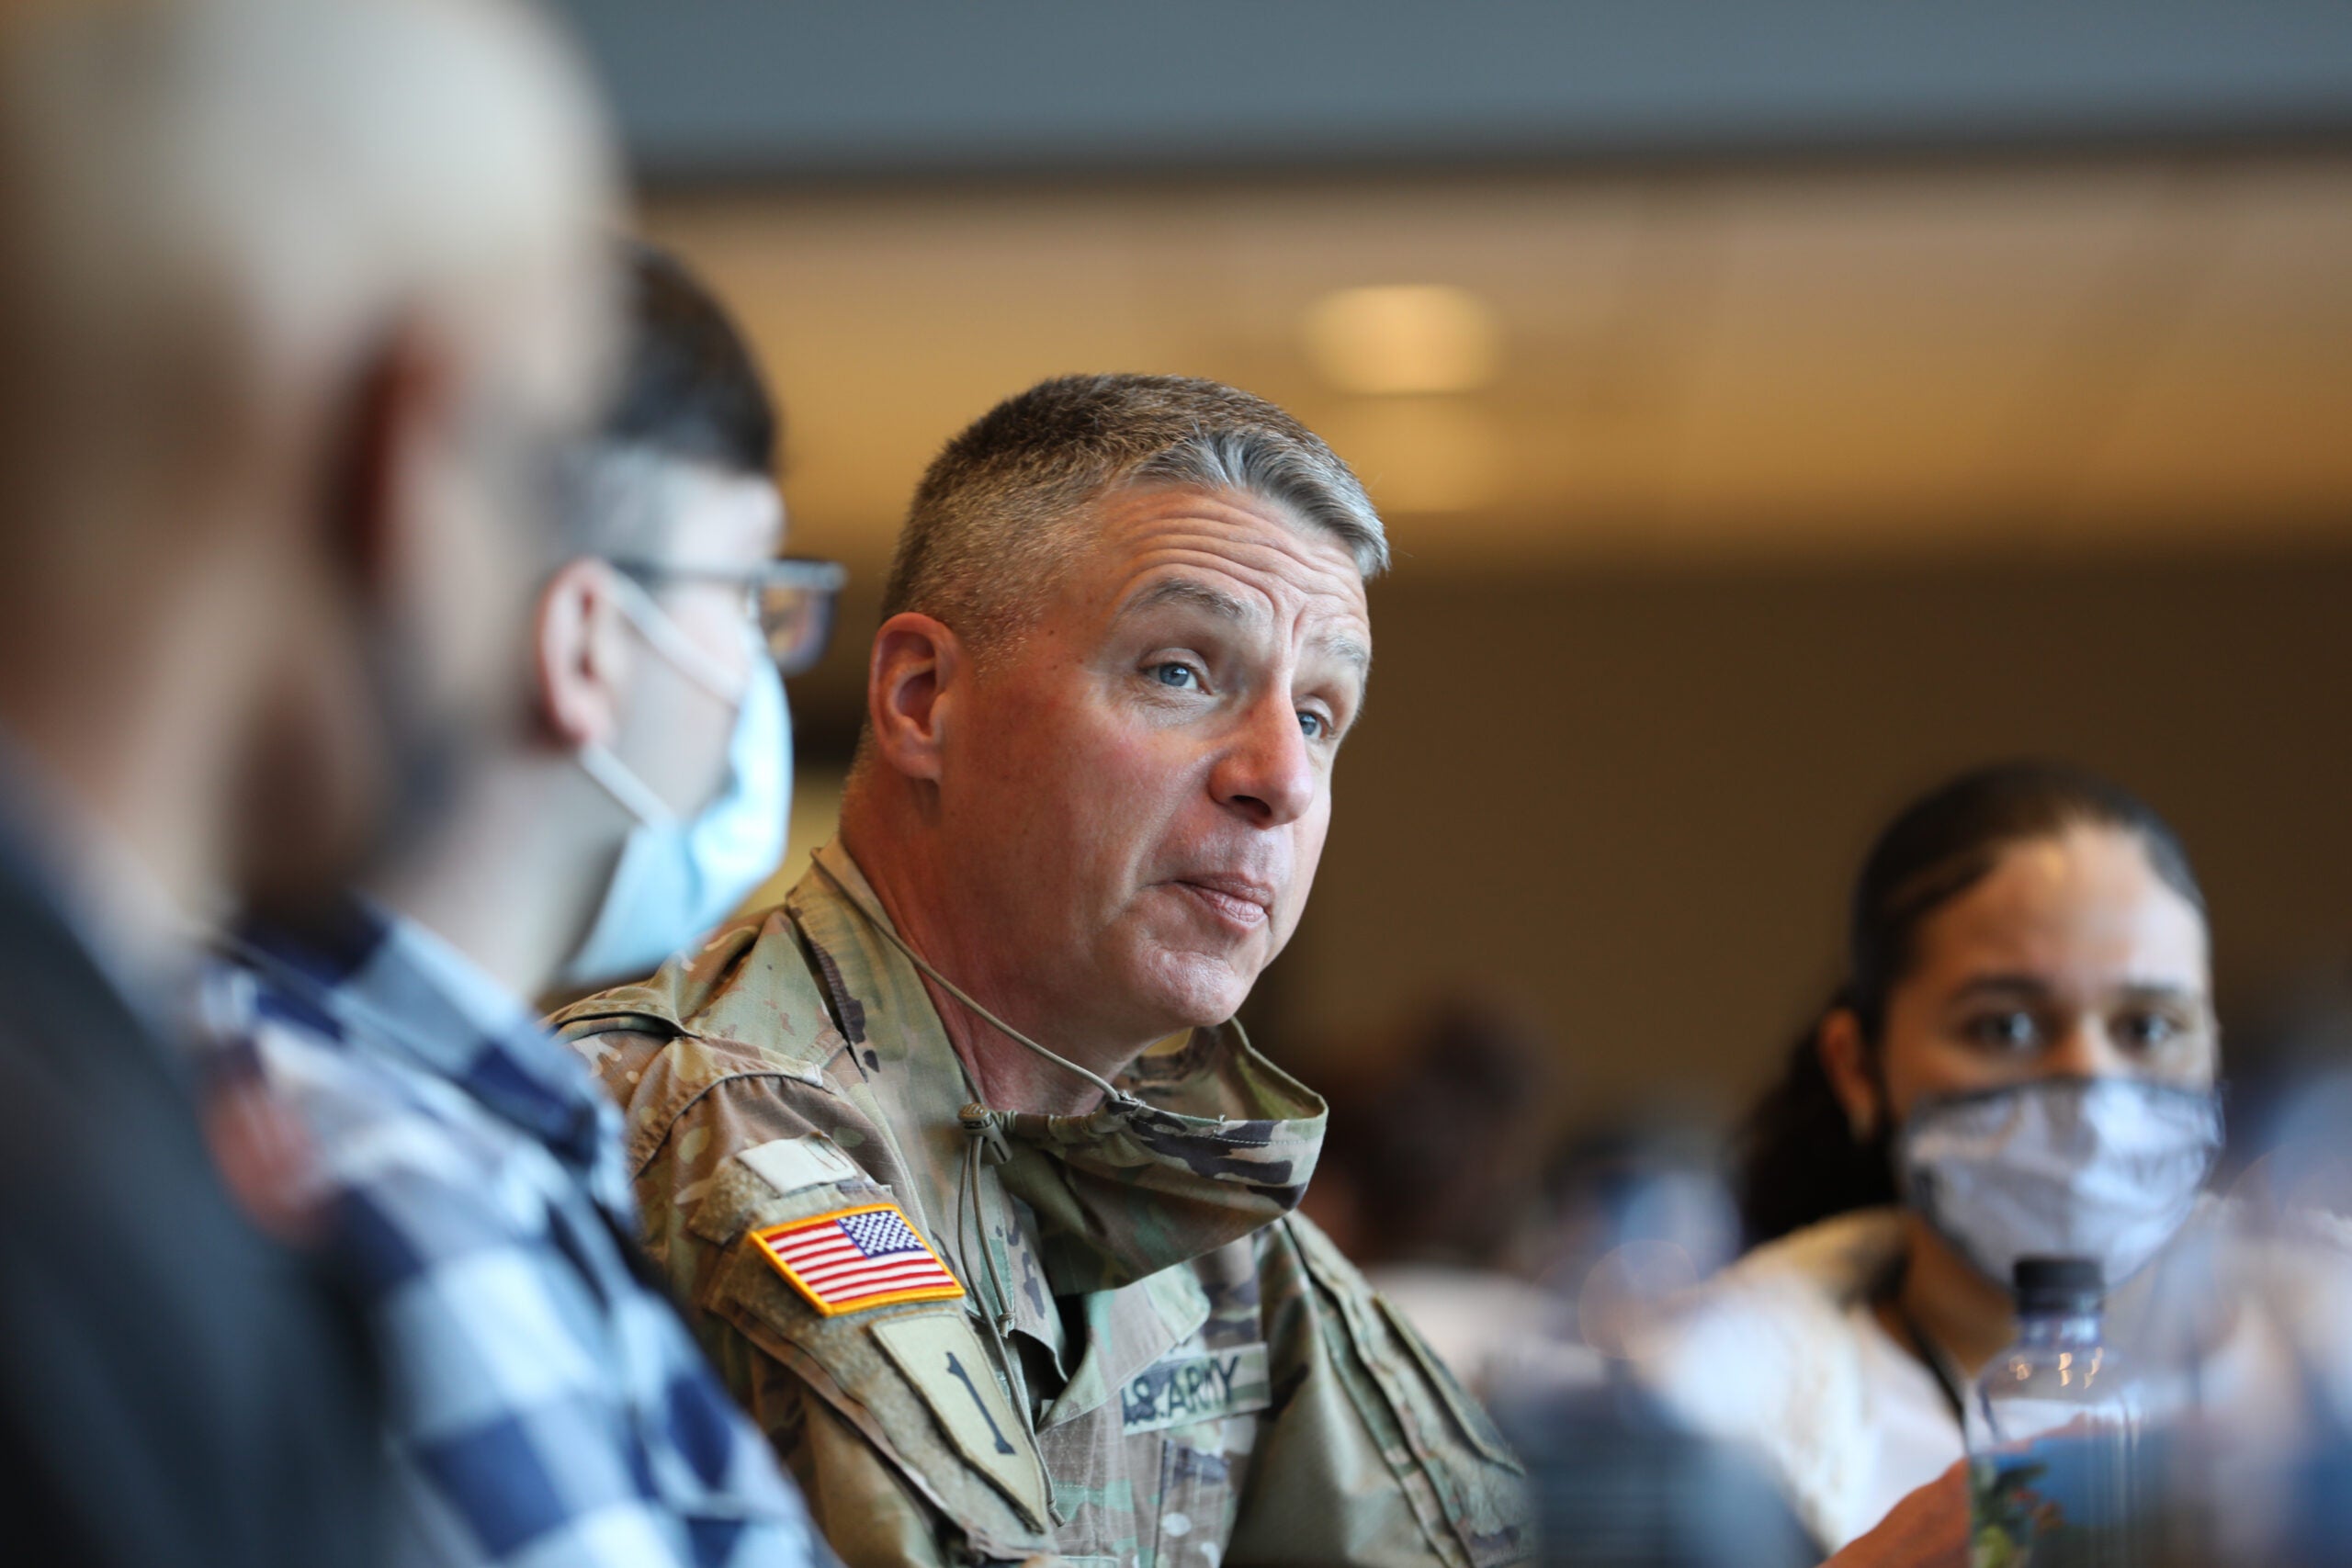 Gen. Joseph M. Martin, the 37th Vice Chief of Staff of the Army, speaks with attendees of the U.S. Army People First Solarium at West Point, NY, March 15, 2021. The Solarium brings together Soldiers with under two years of service from all demographics to discuss serious issues within the Army, and to help develop solutions to rebuild an Army-wide culture of dignity, trust and respect. (U.S. Army photo by Spc. Laura Hardin)